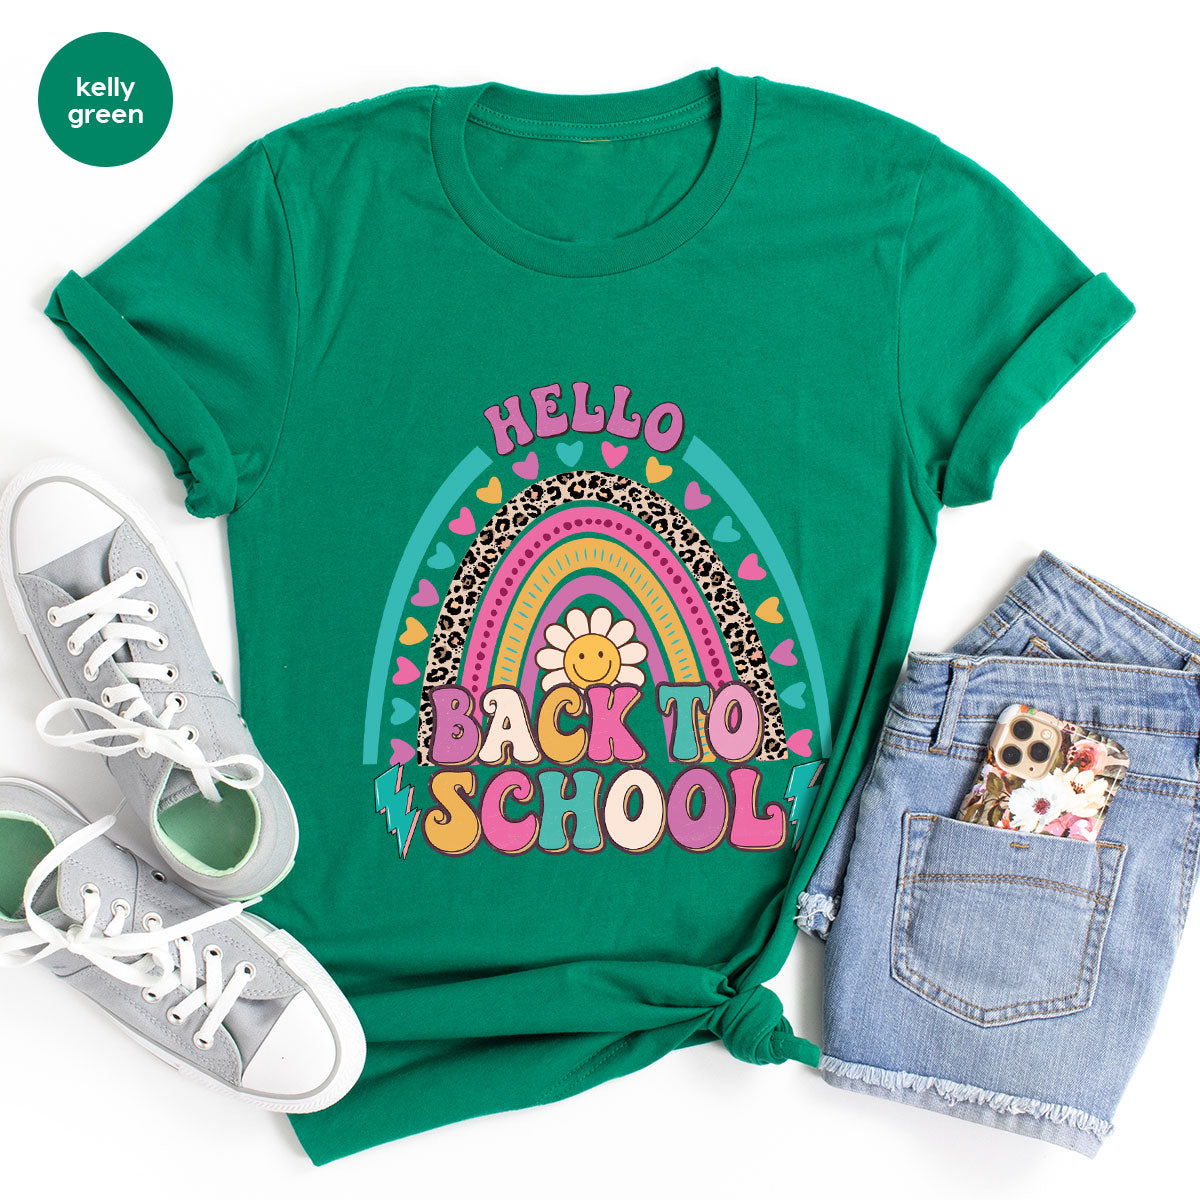 Inspirational Teacher Shirt, First Day Of School Clothing, Welcome Back To School Tshirt,n ainbow Graphic Tee